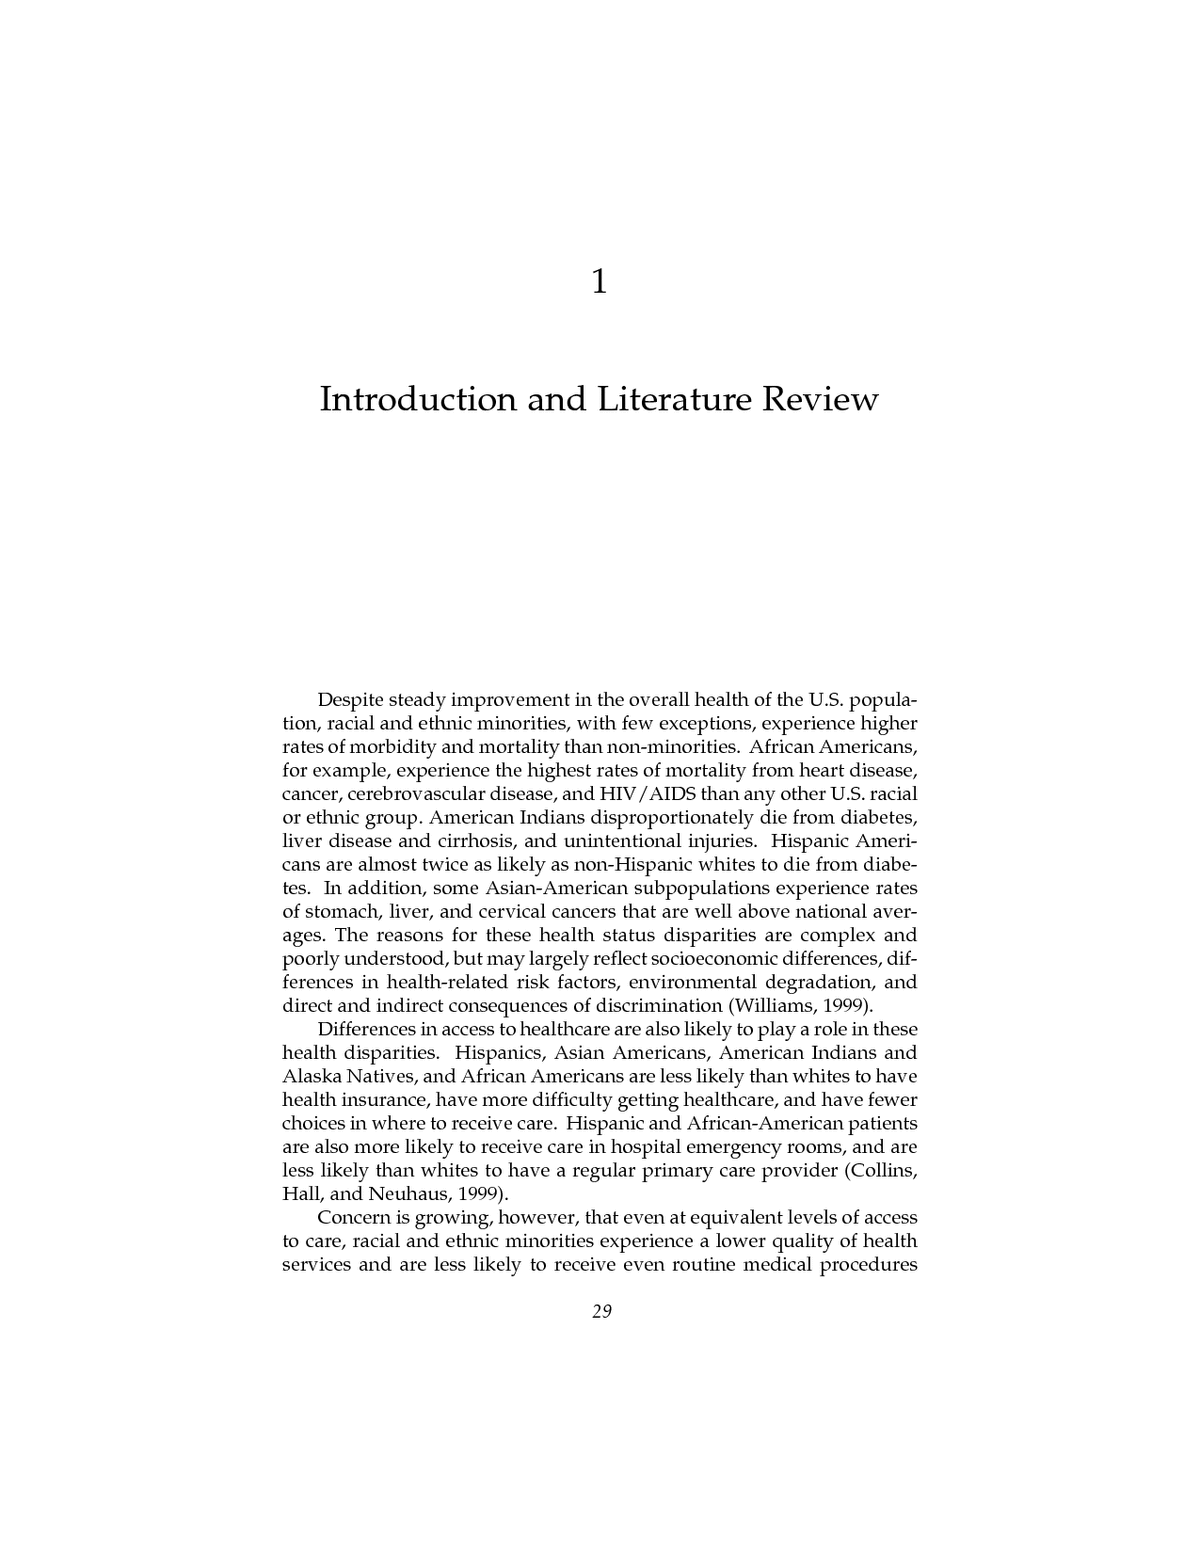 Example of the introduction of a literature review